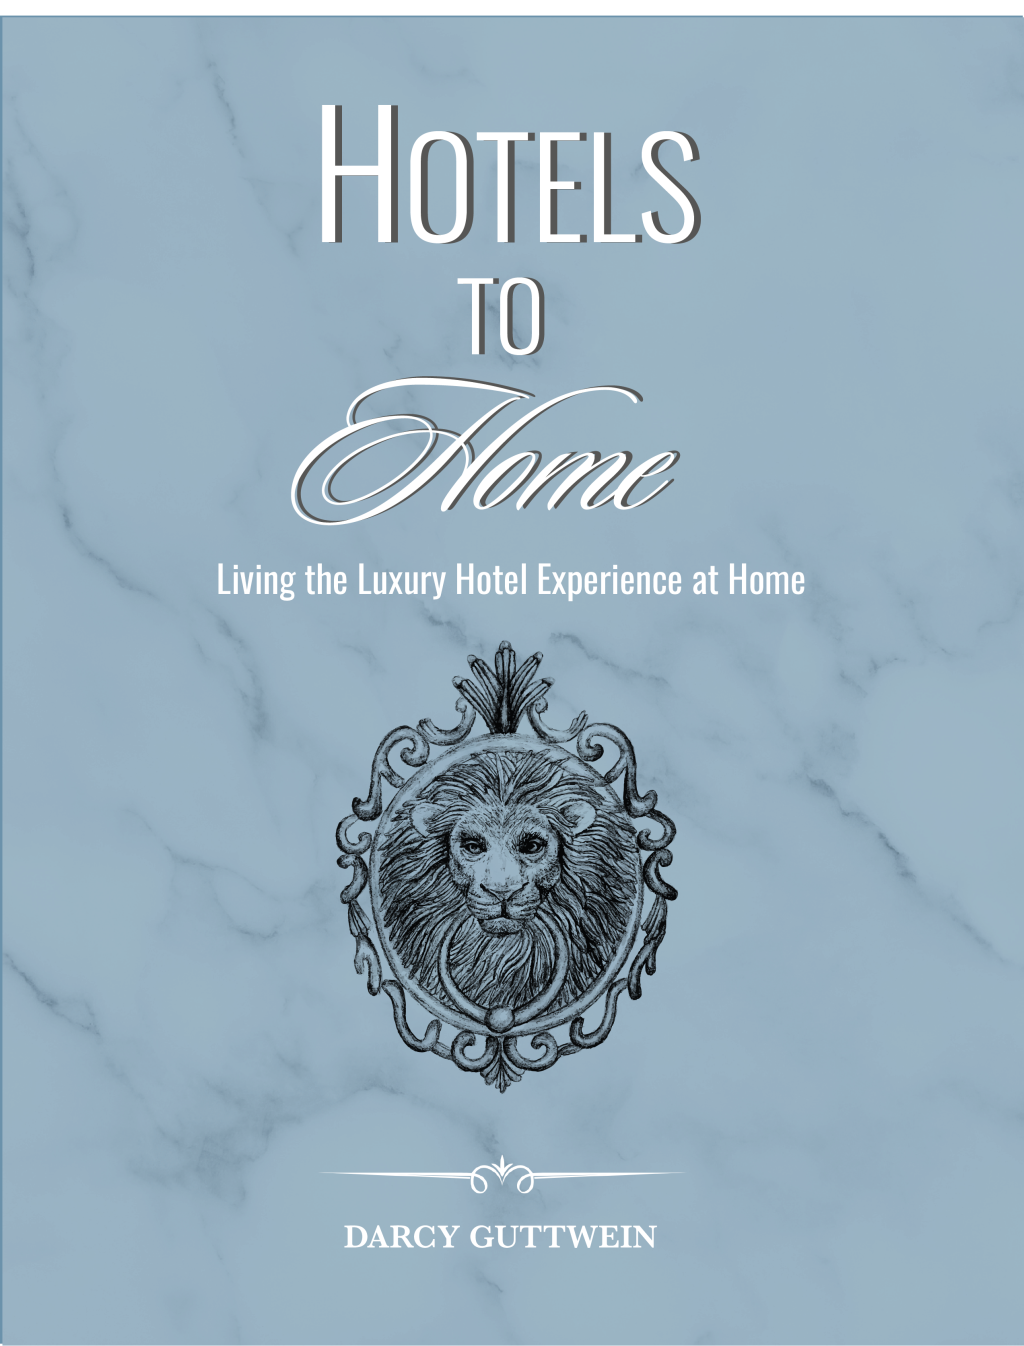 071 Hotels To Home: Living the Luxury Hotel Experience at Home w/ Darcy Guttwein Pt.1